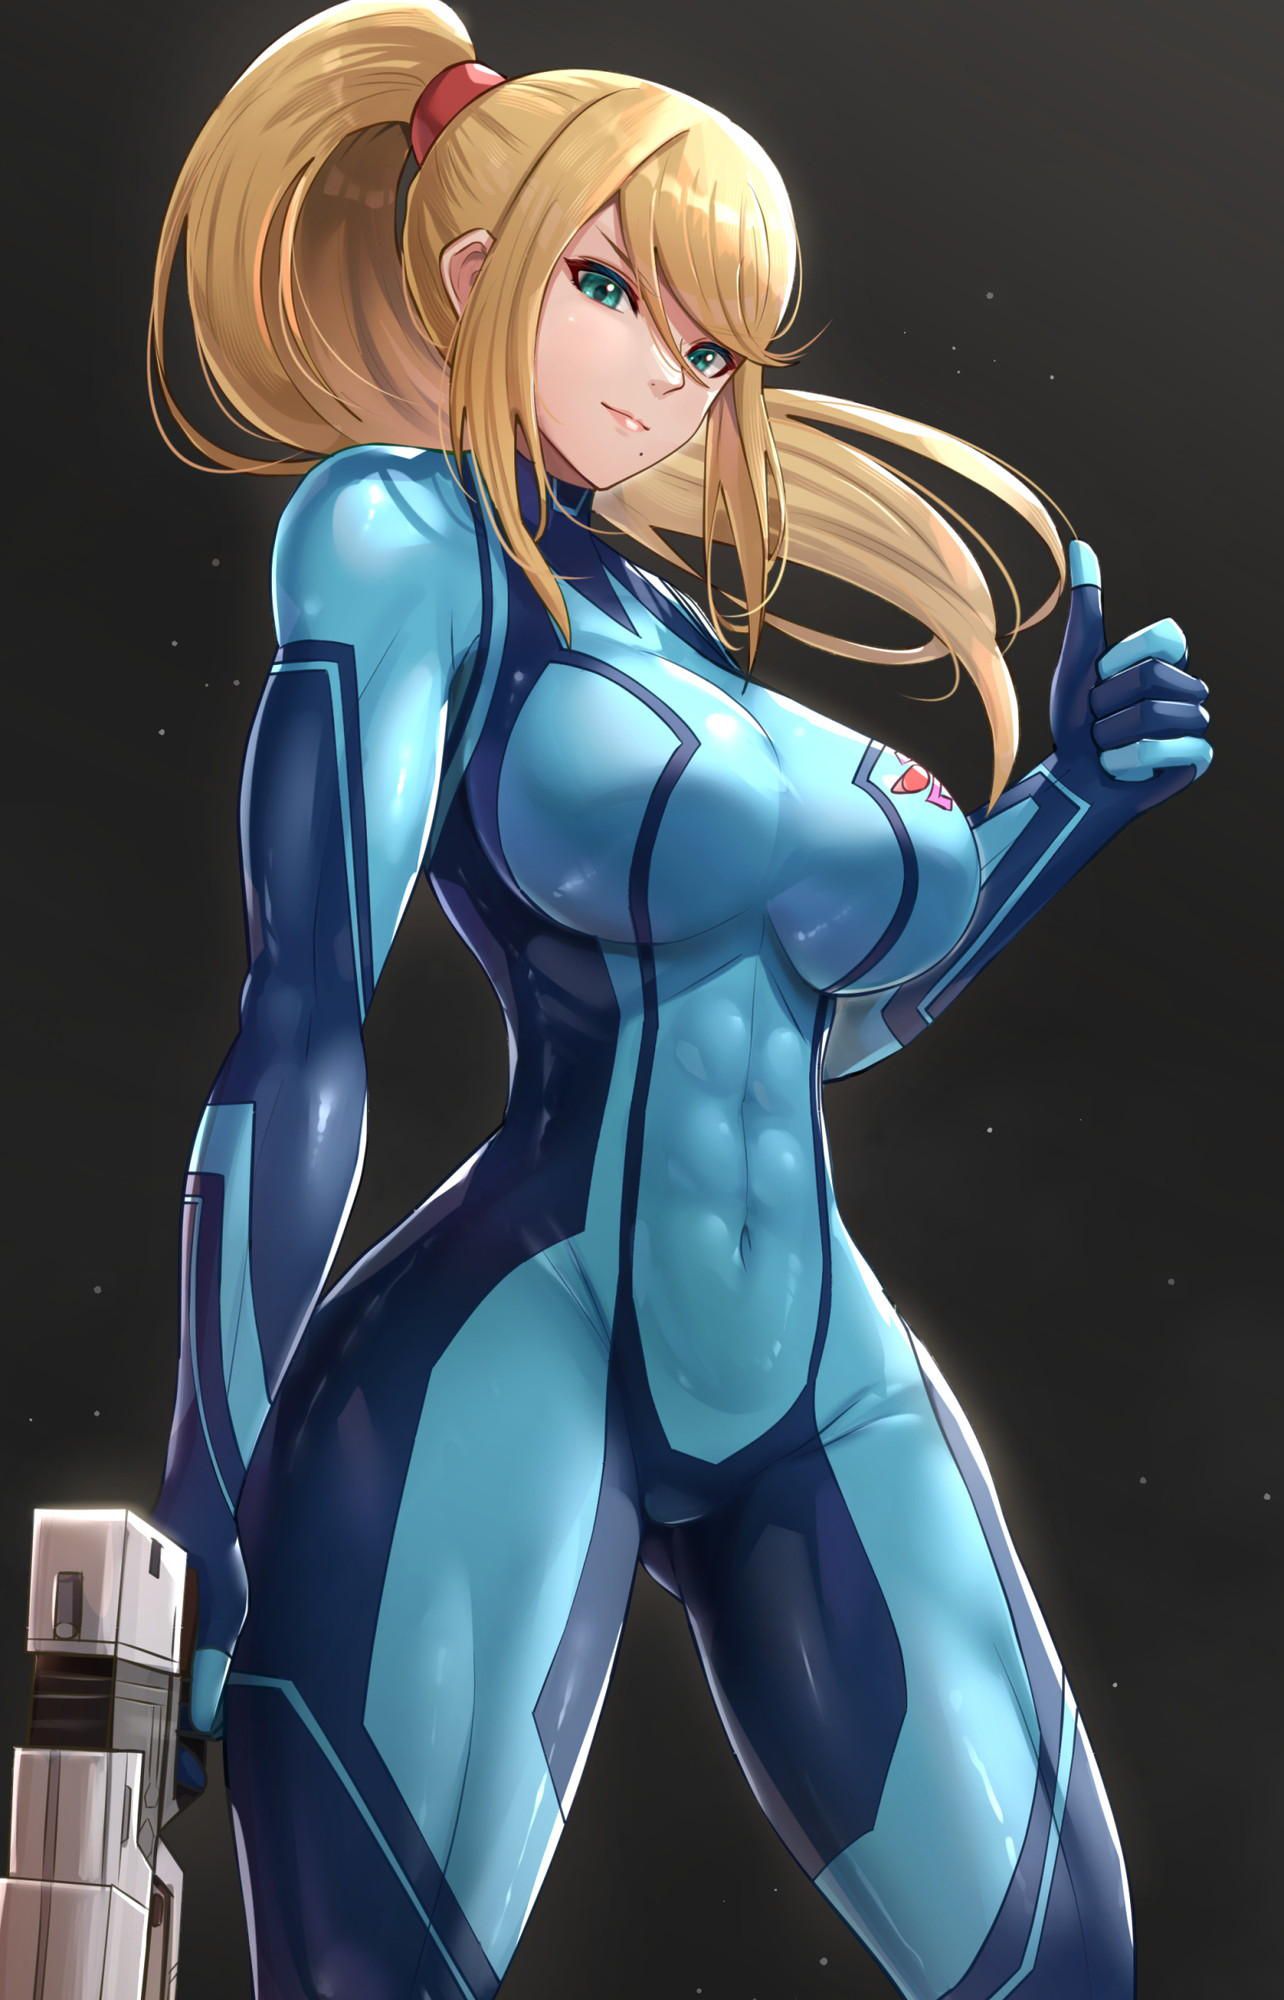 Metroid's secondary erotic imagery. 2